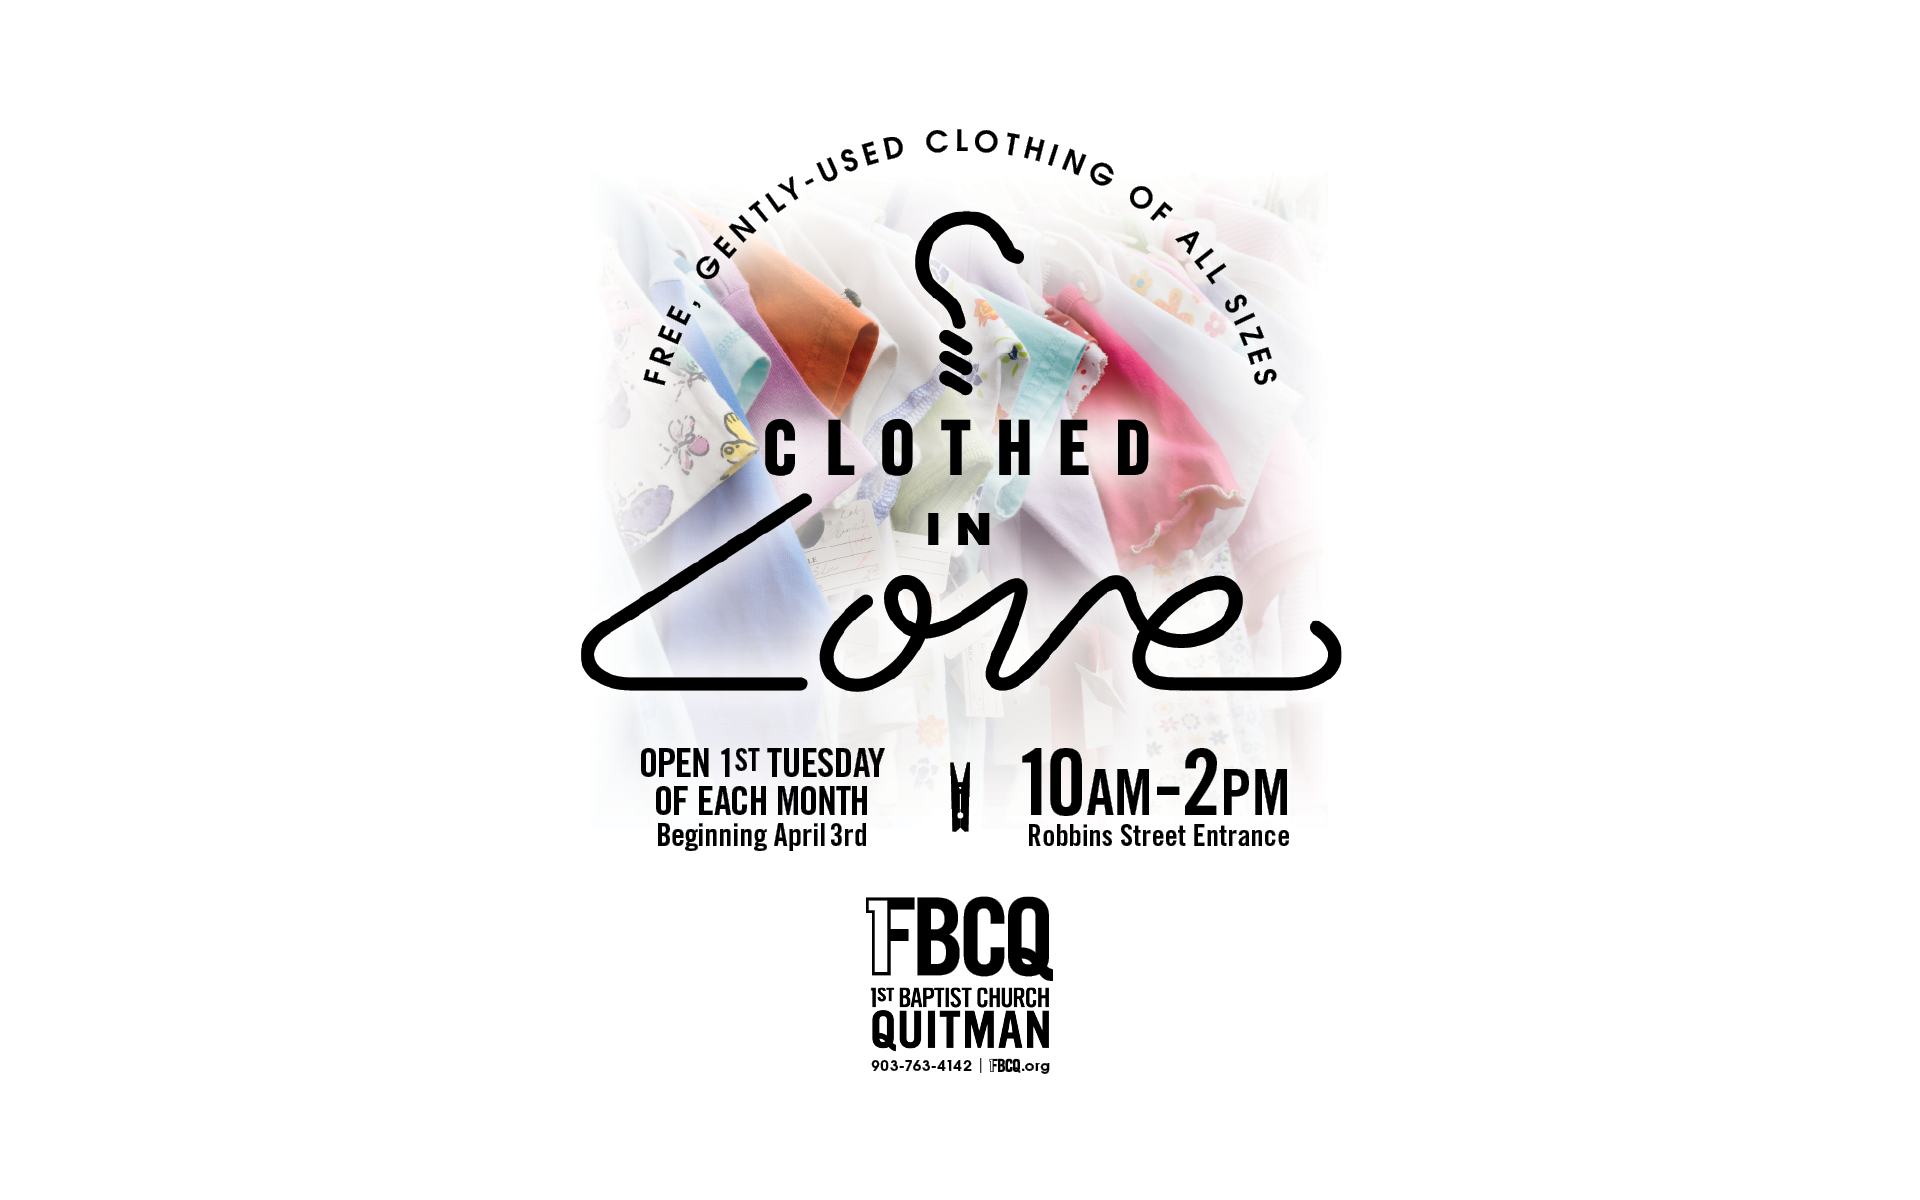 CLOTHED IN LOVE FLIER fbcq.org